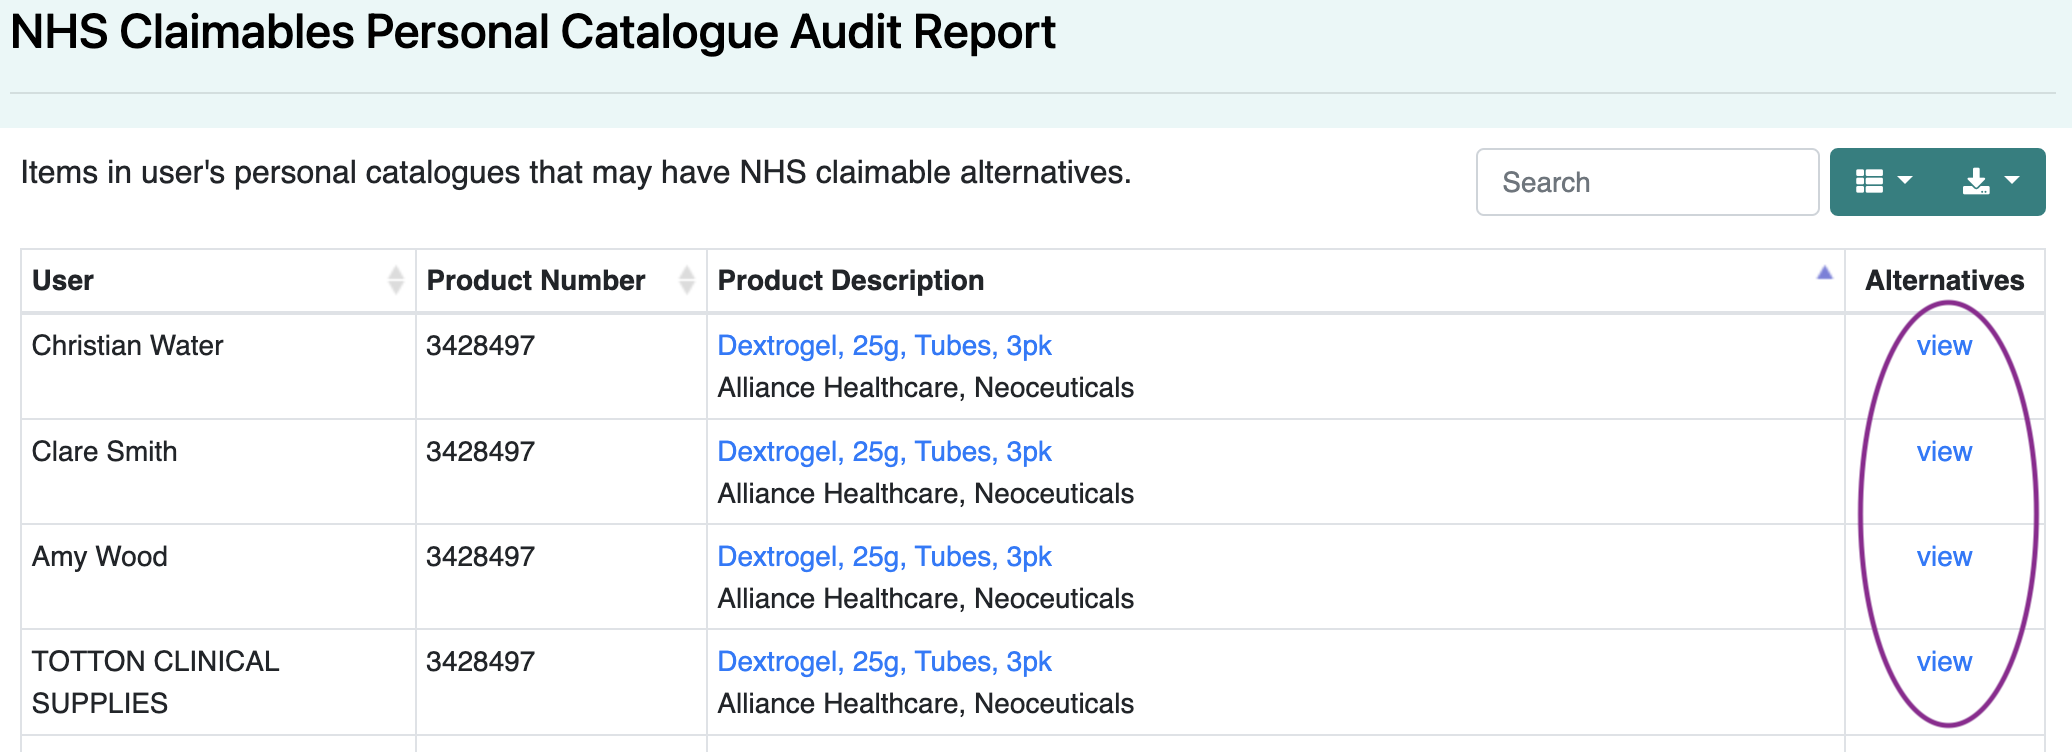 NHS Claimables Personal Catalogue Audit Report Review